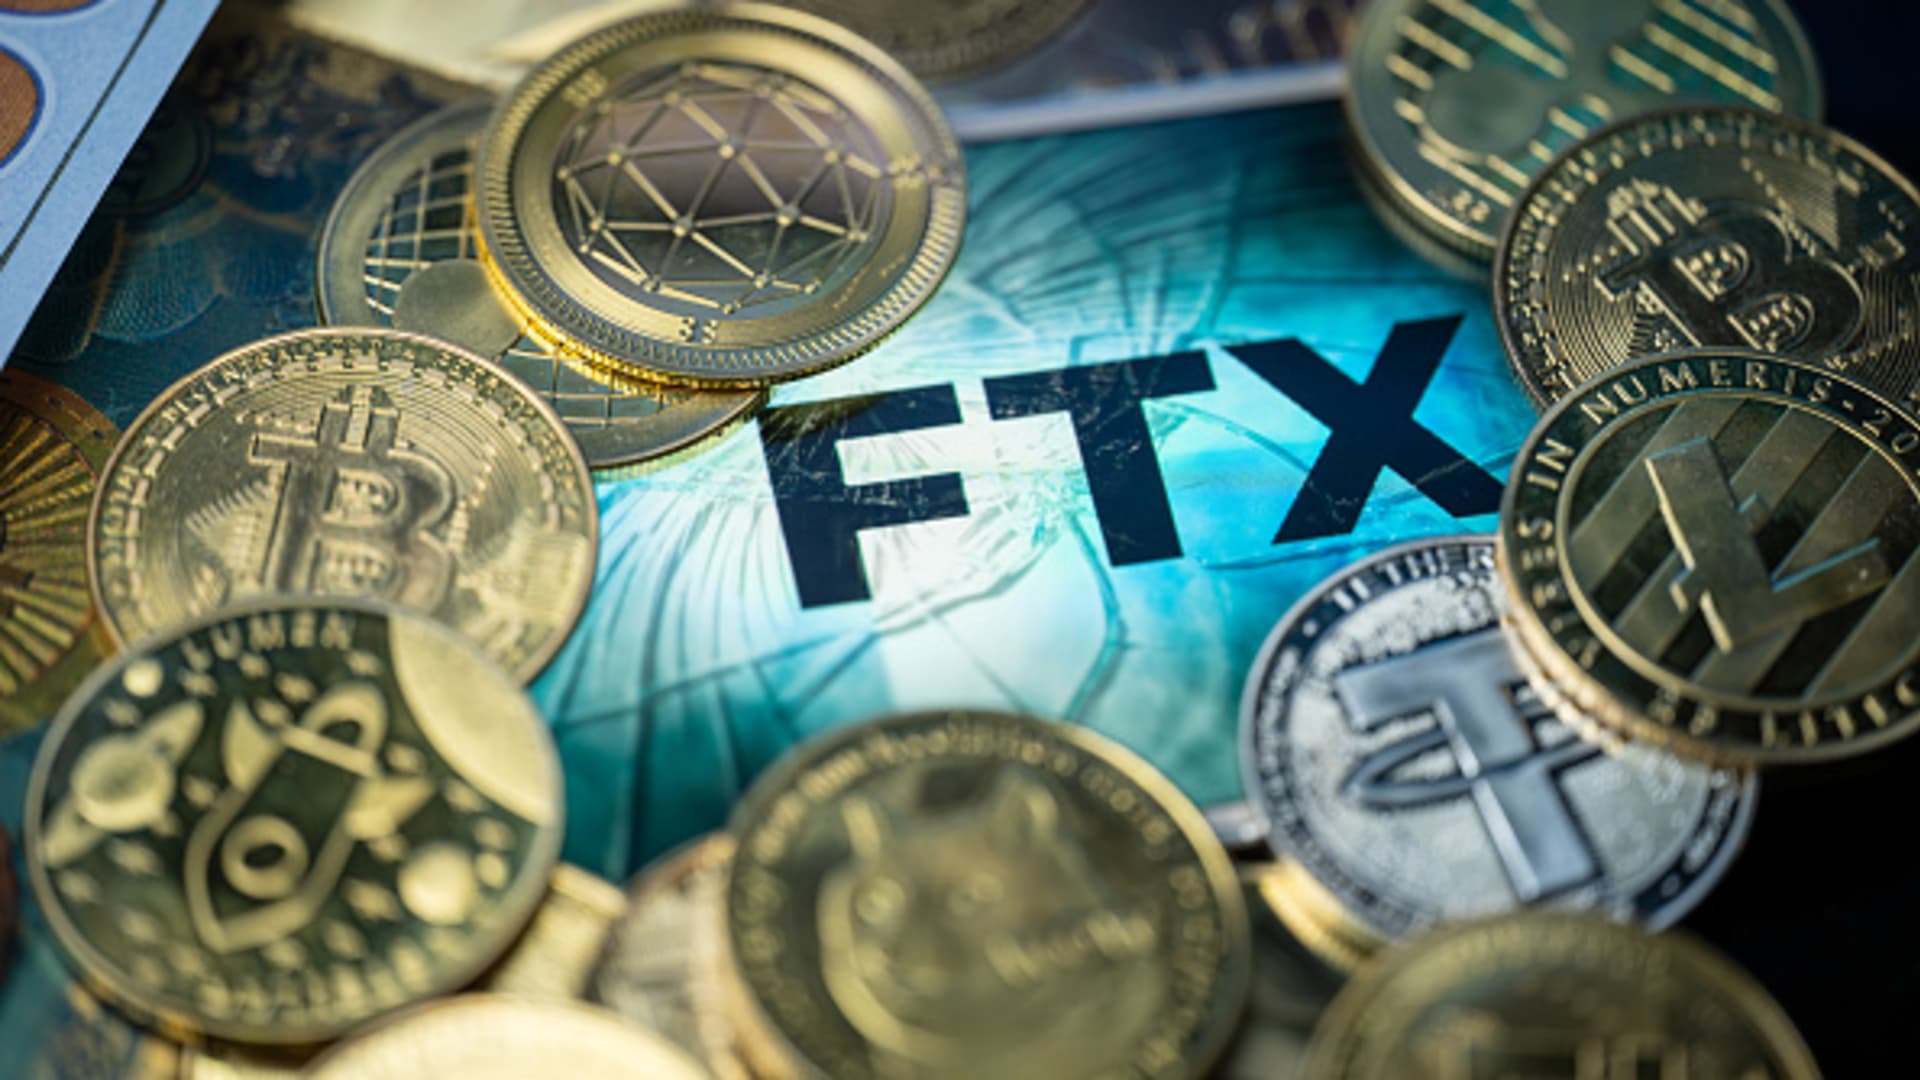 The FTX disaster has set back crypto by ‘years’ — here are 3 ways it could reshape the industry